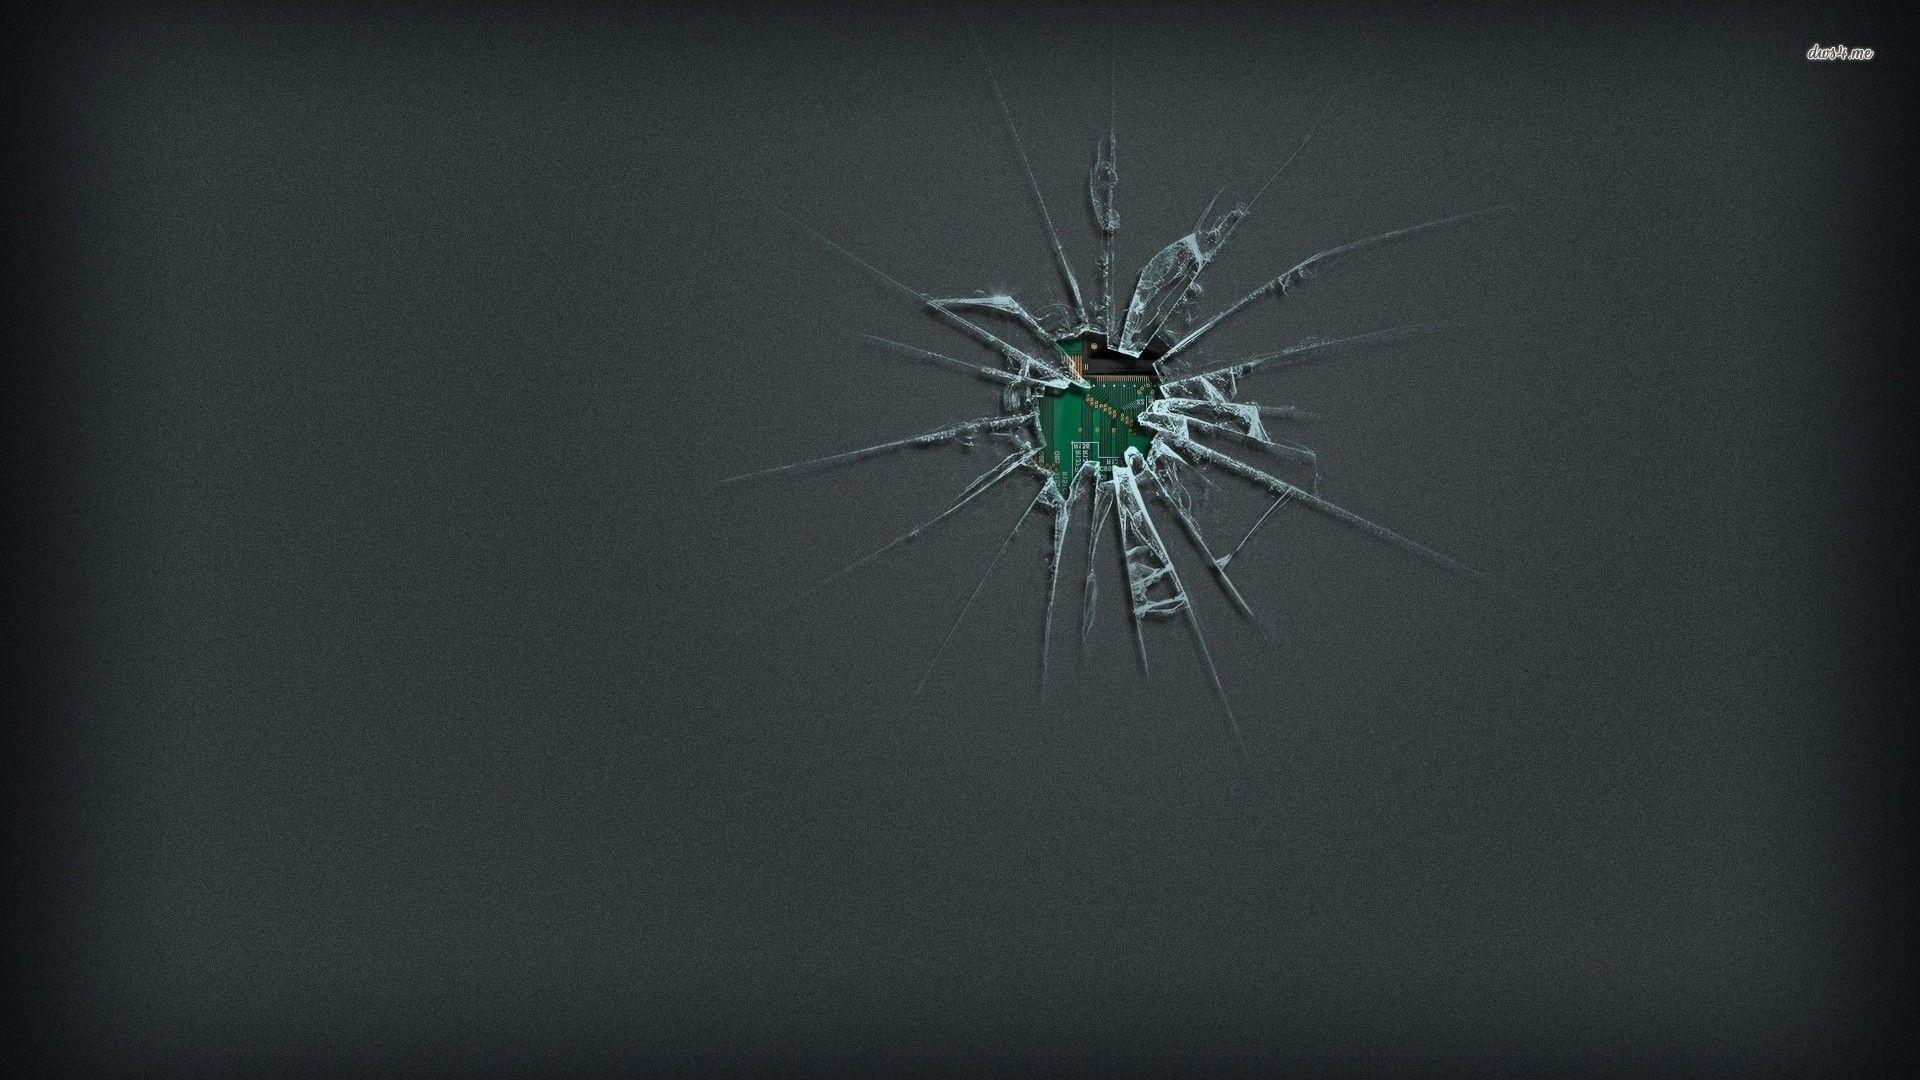 200+] Cracked Screen Wallpapers | Wallpapers.com